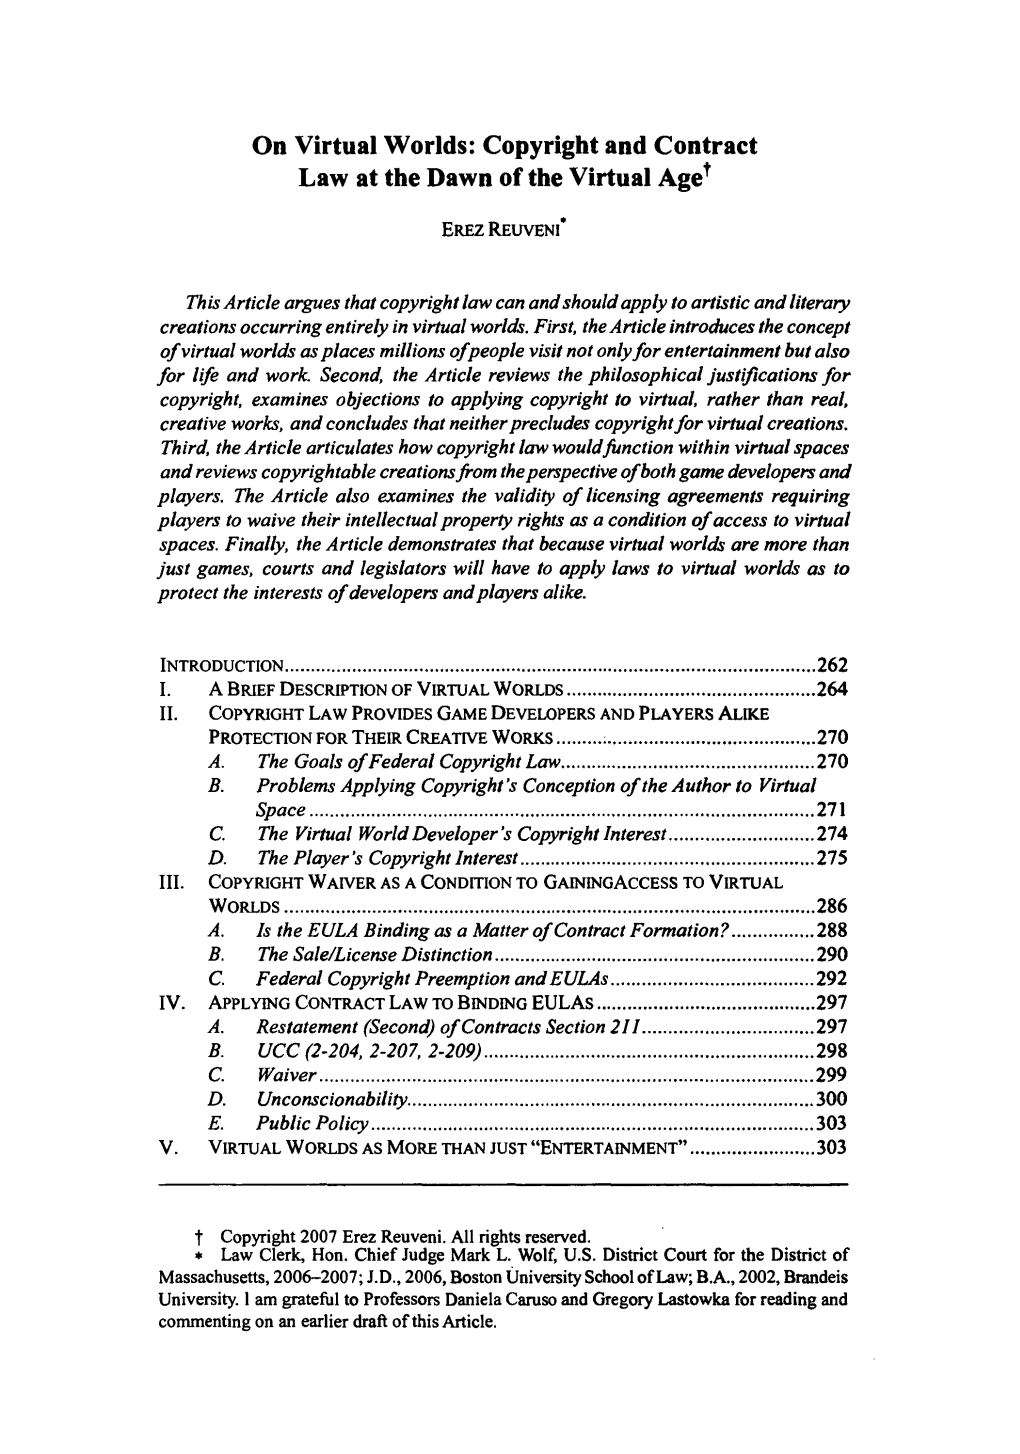 On Virtual Worlds: Copyright and Contract Law at the Dawn of the Virtual Aget